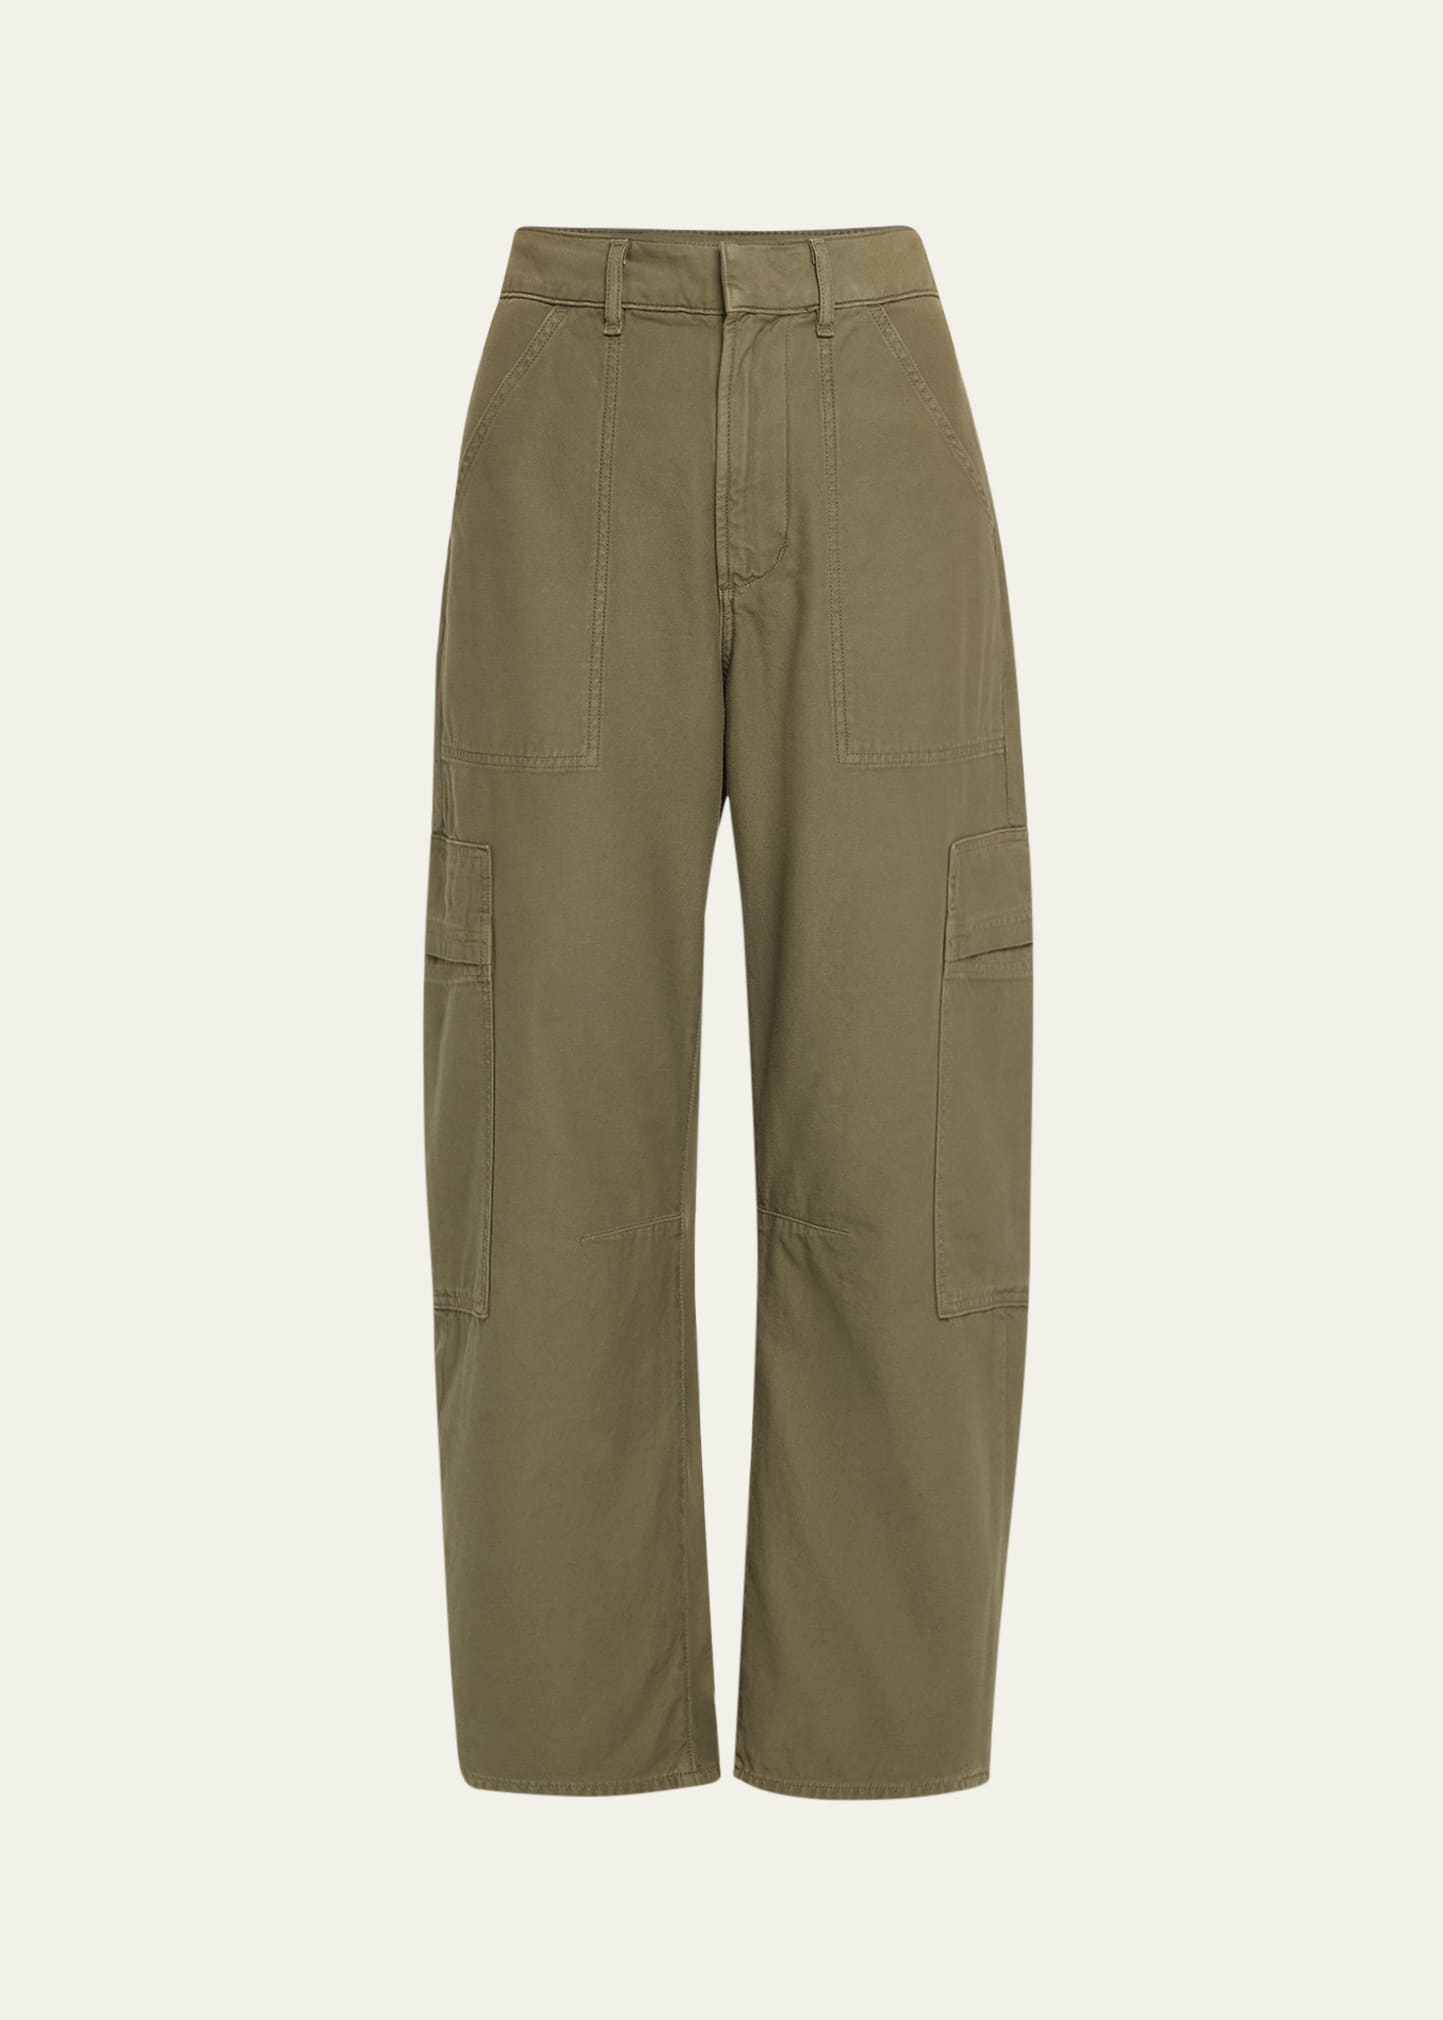 Citizens Of Humanity Marcelle Straight Twill Cargo Pants In Palmdale Md Dk